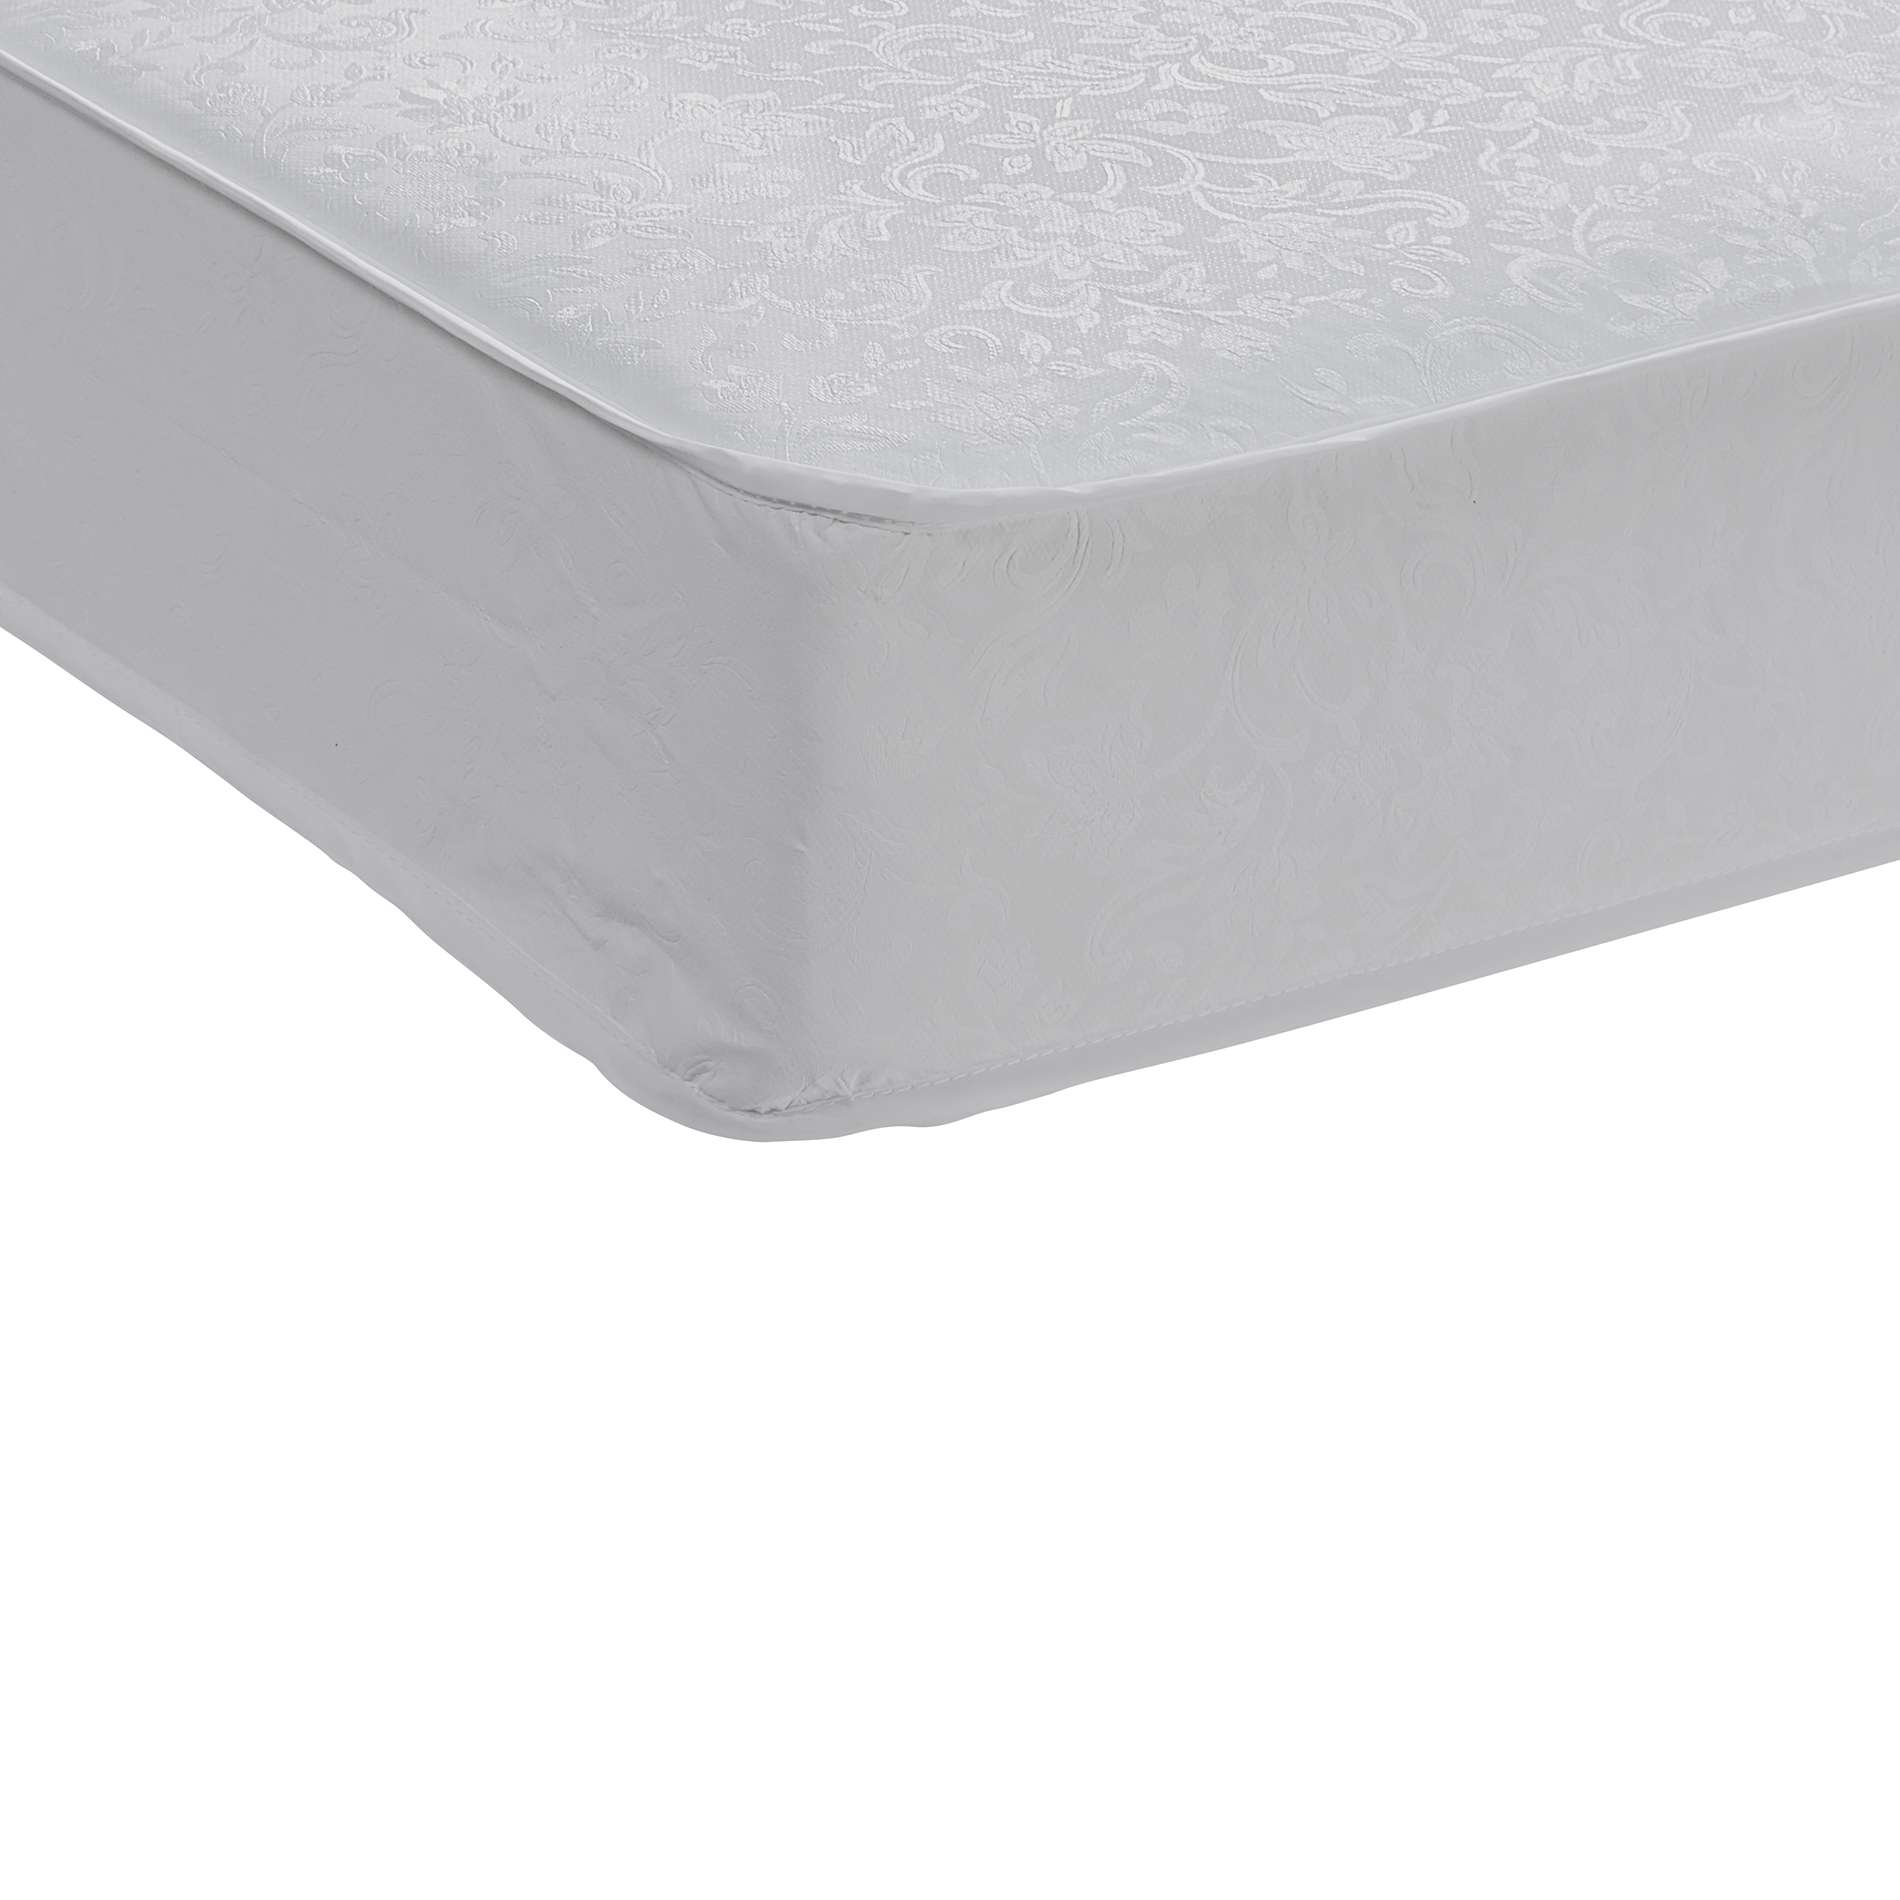 safety 1st safety 1st heavenly dreams mattress